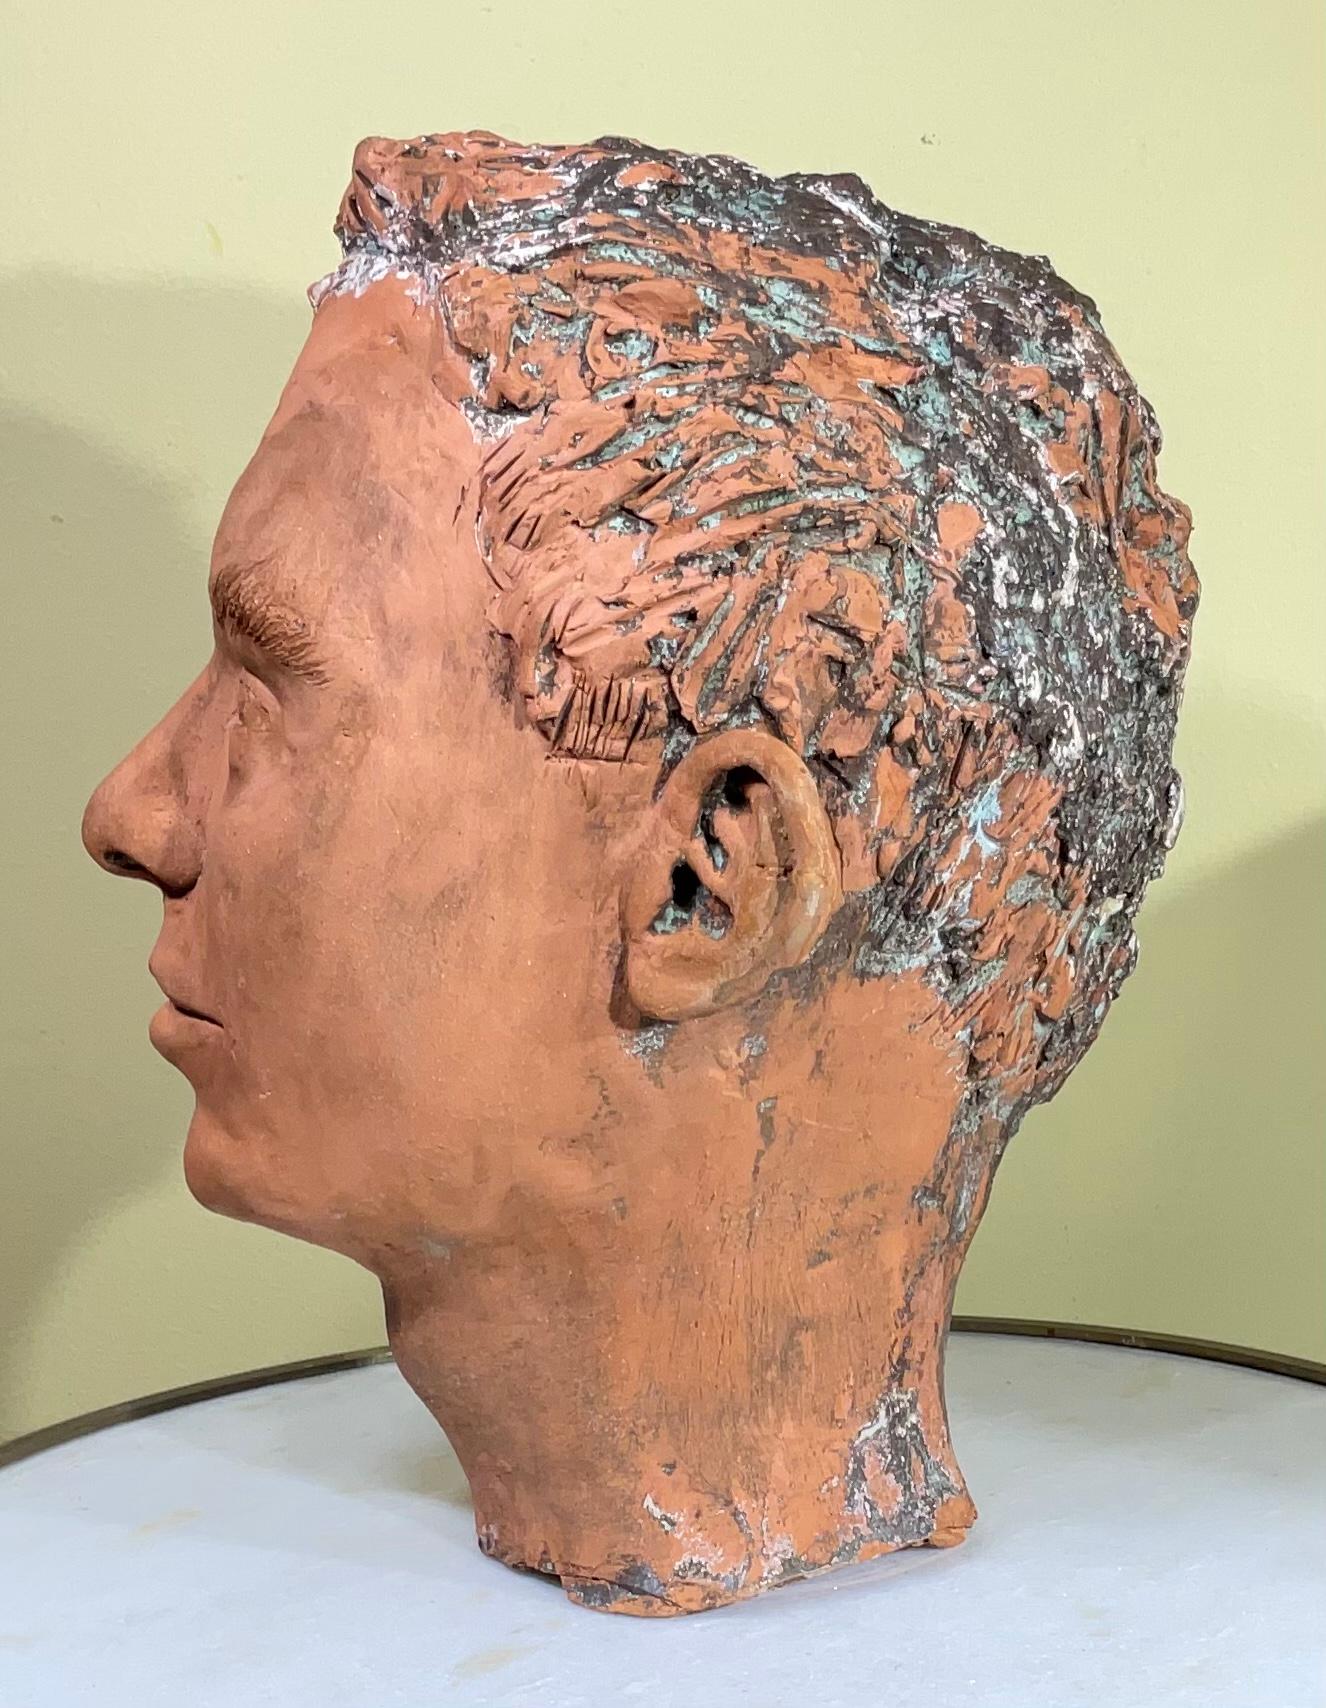 Intriguing bust of a young man made of rustic unglazed terra-cotta great eyes expression, looking forward.
Beautiful object of art for display.

